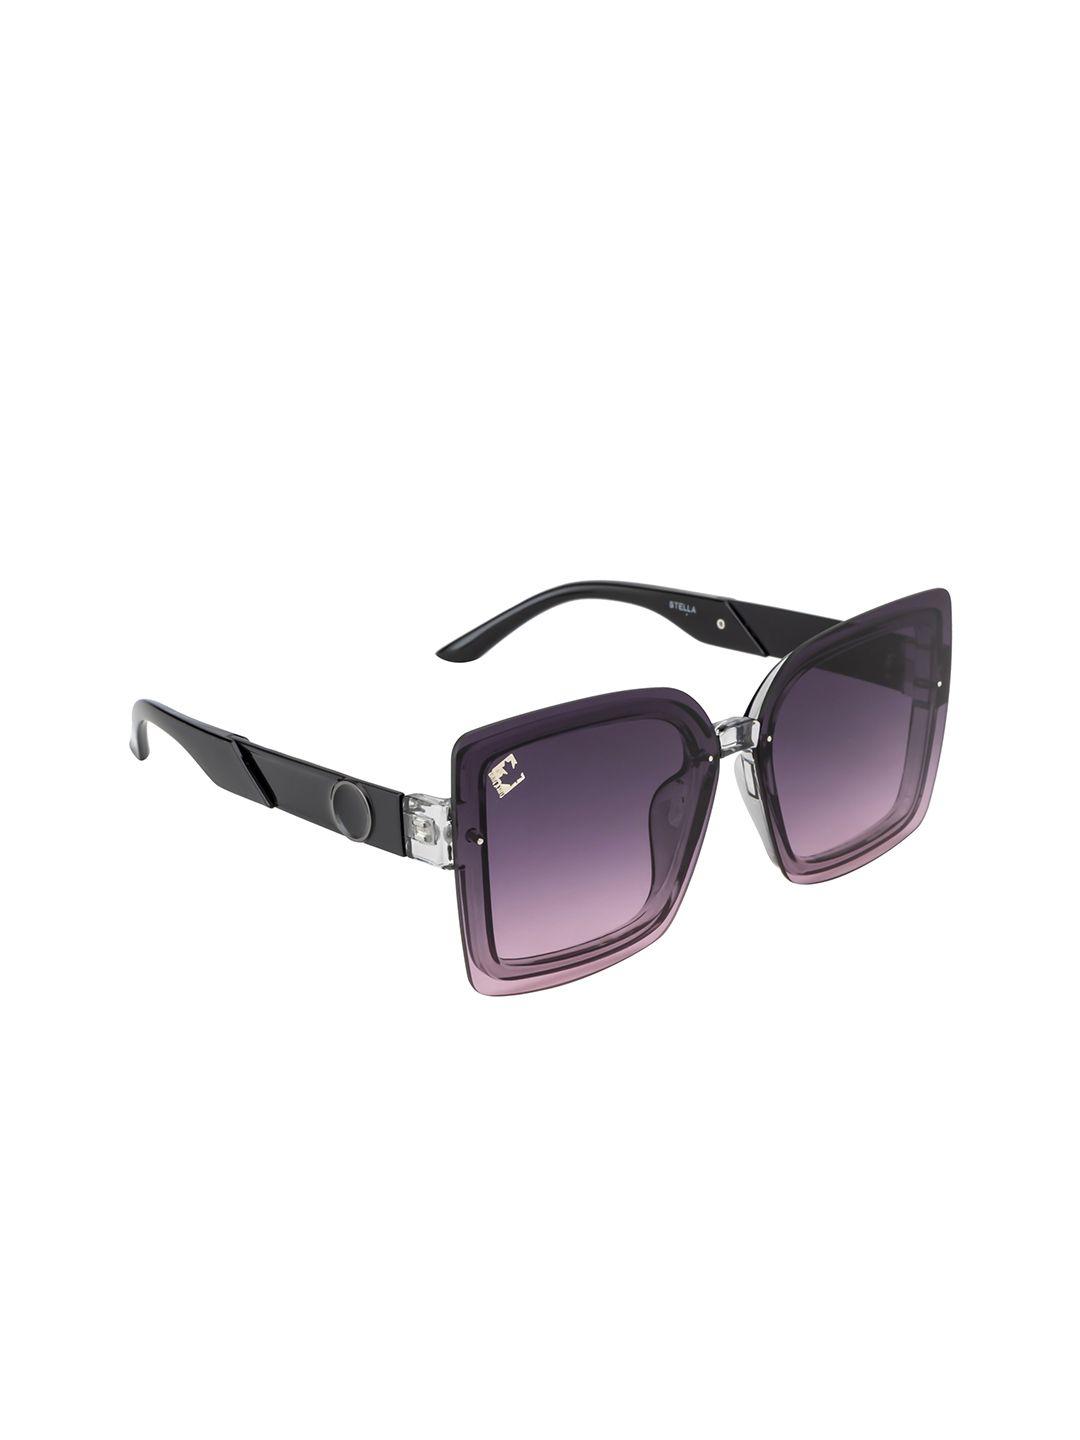 clark n palmer women butterfly sunglasses with uv protected lens